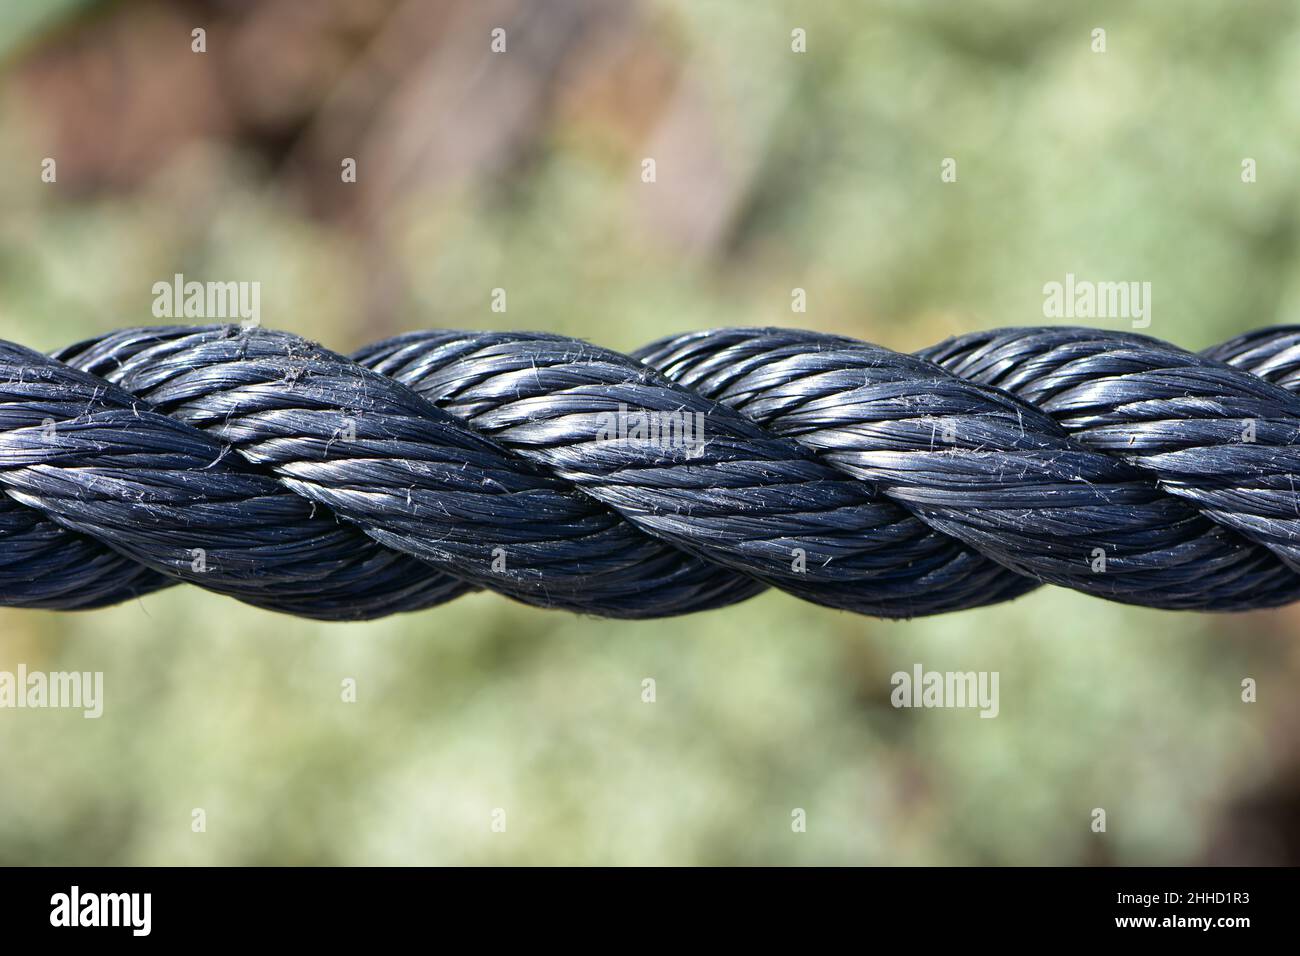 Detail of thick black twisted synthetic rope with some surface fibres worn by abrasion. Stock Photo